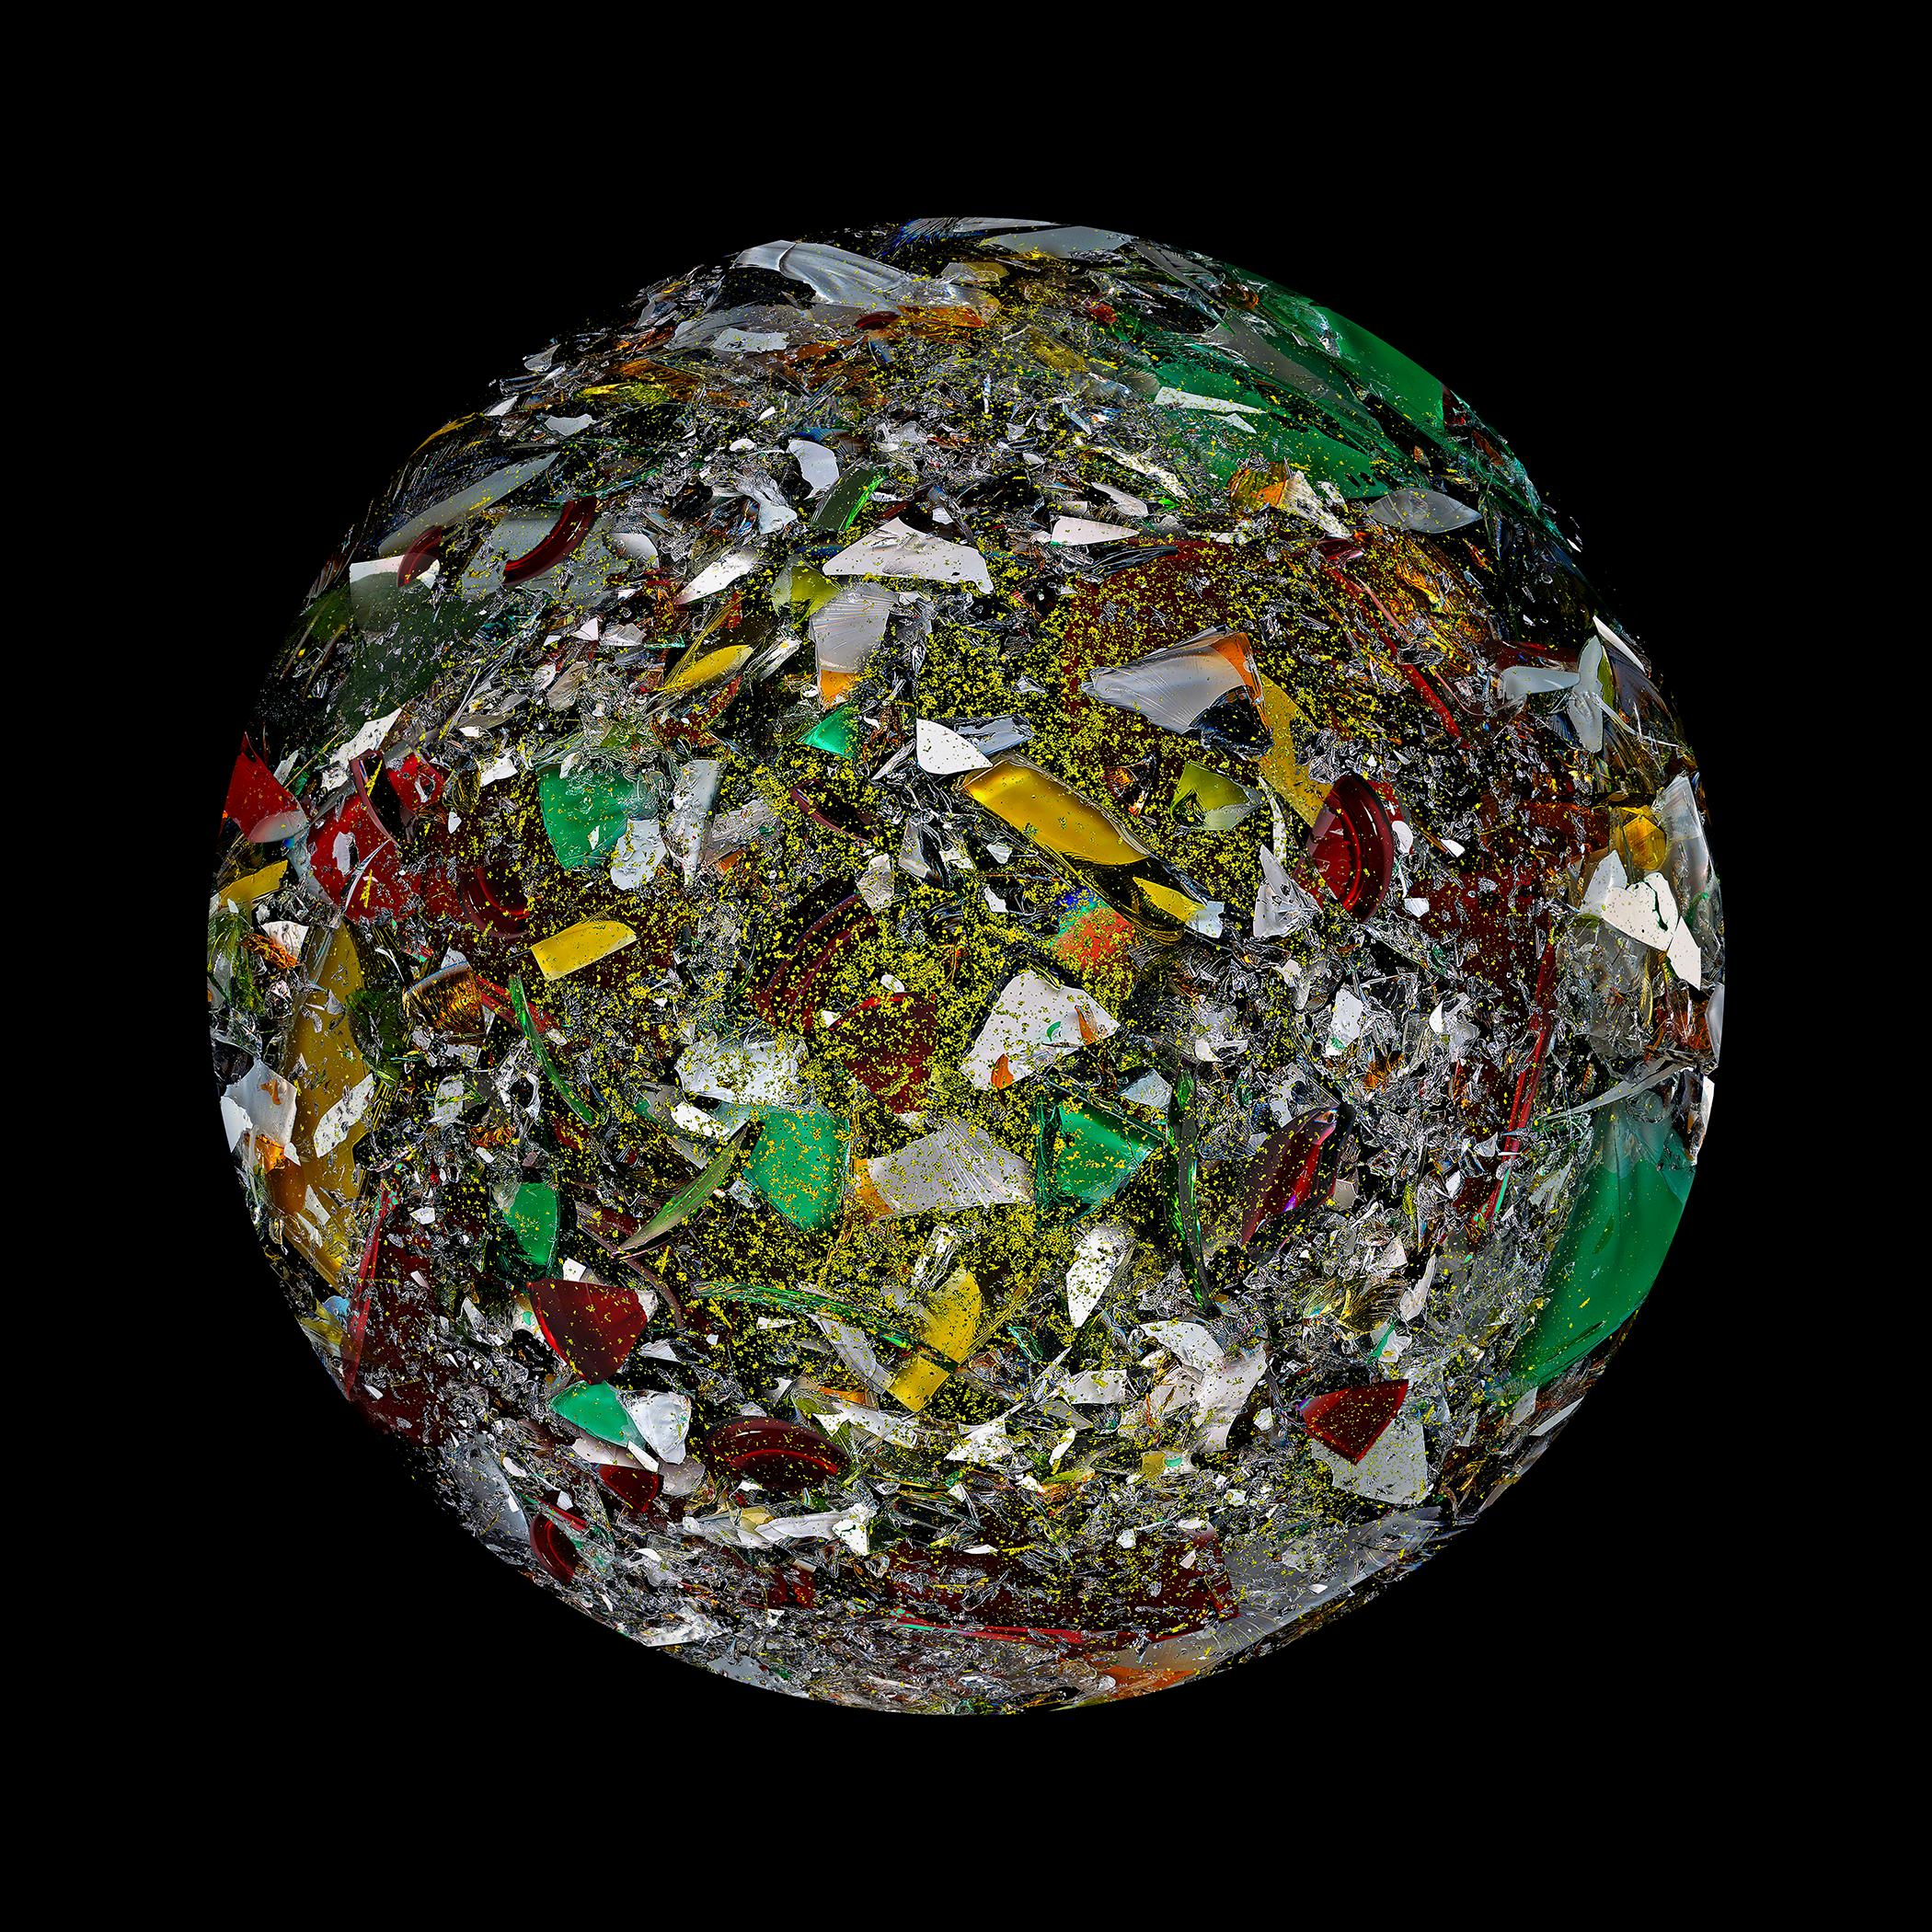 Zoltan Gerliczki Color Photograph - The Greedy Planet. The Broken Planet Series. Abstract Digital Collage Photograph